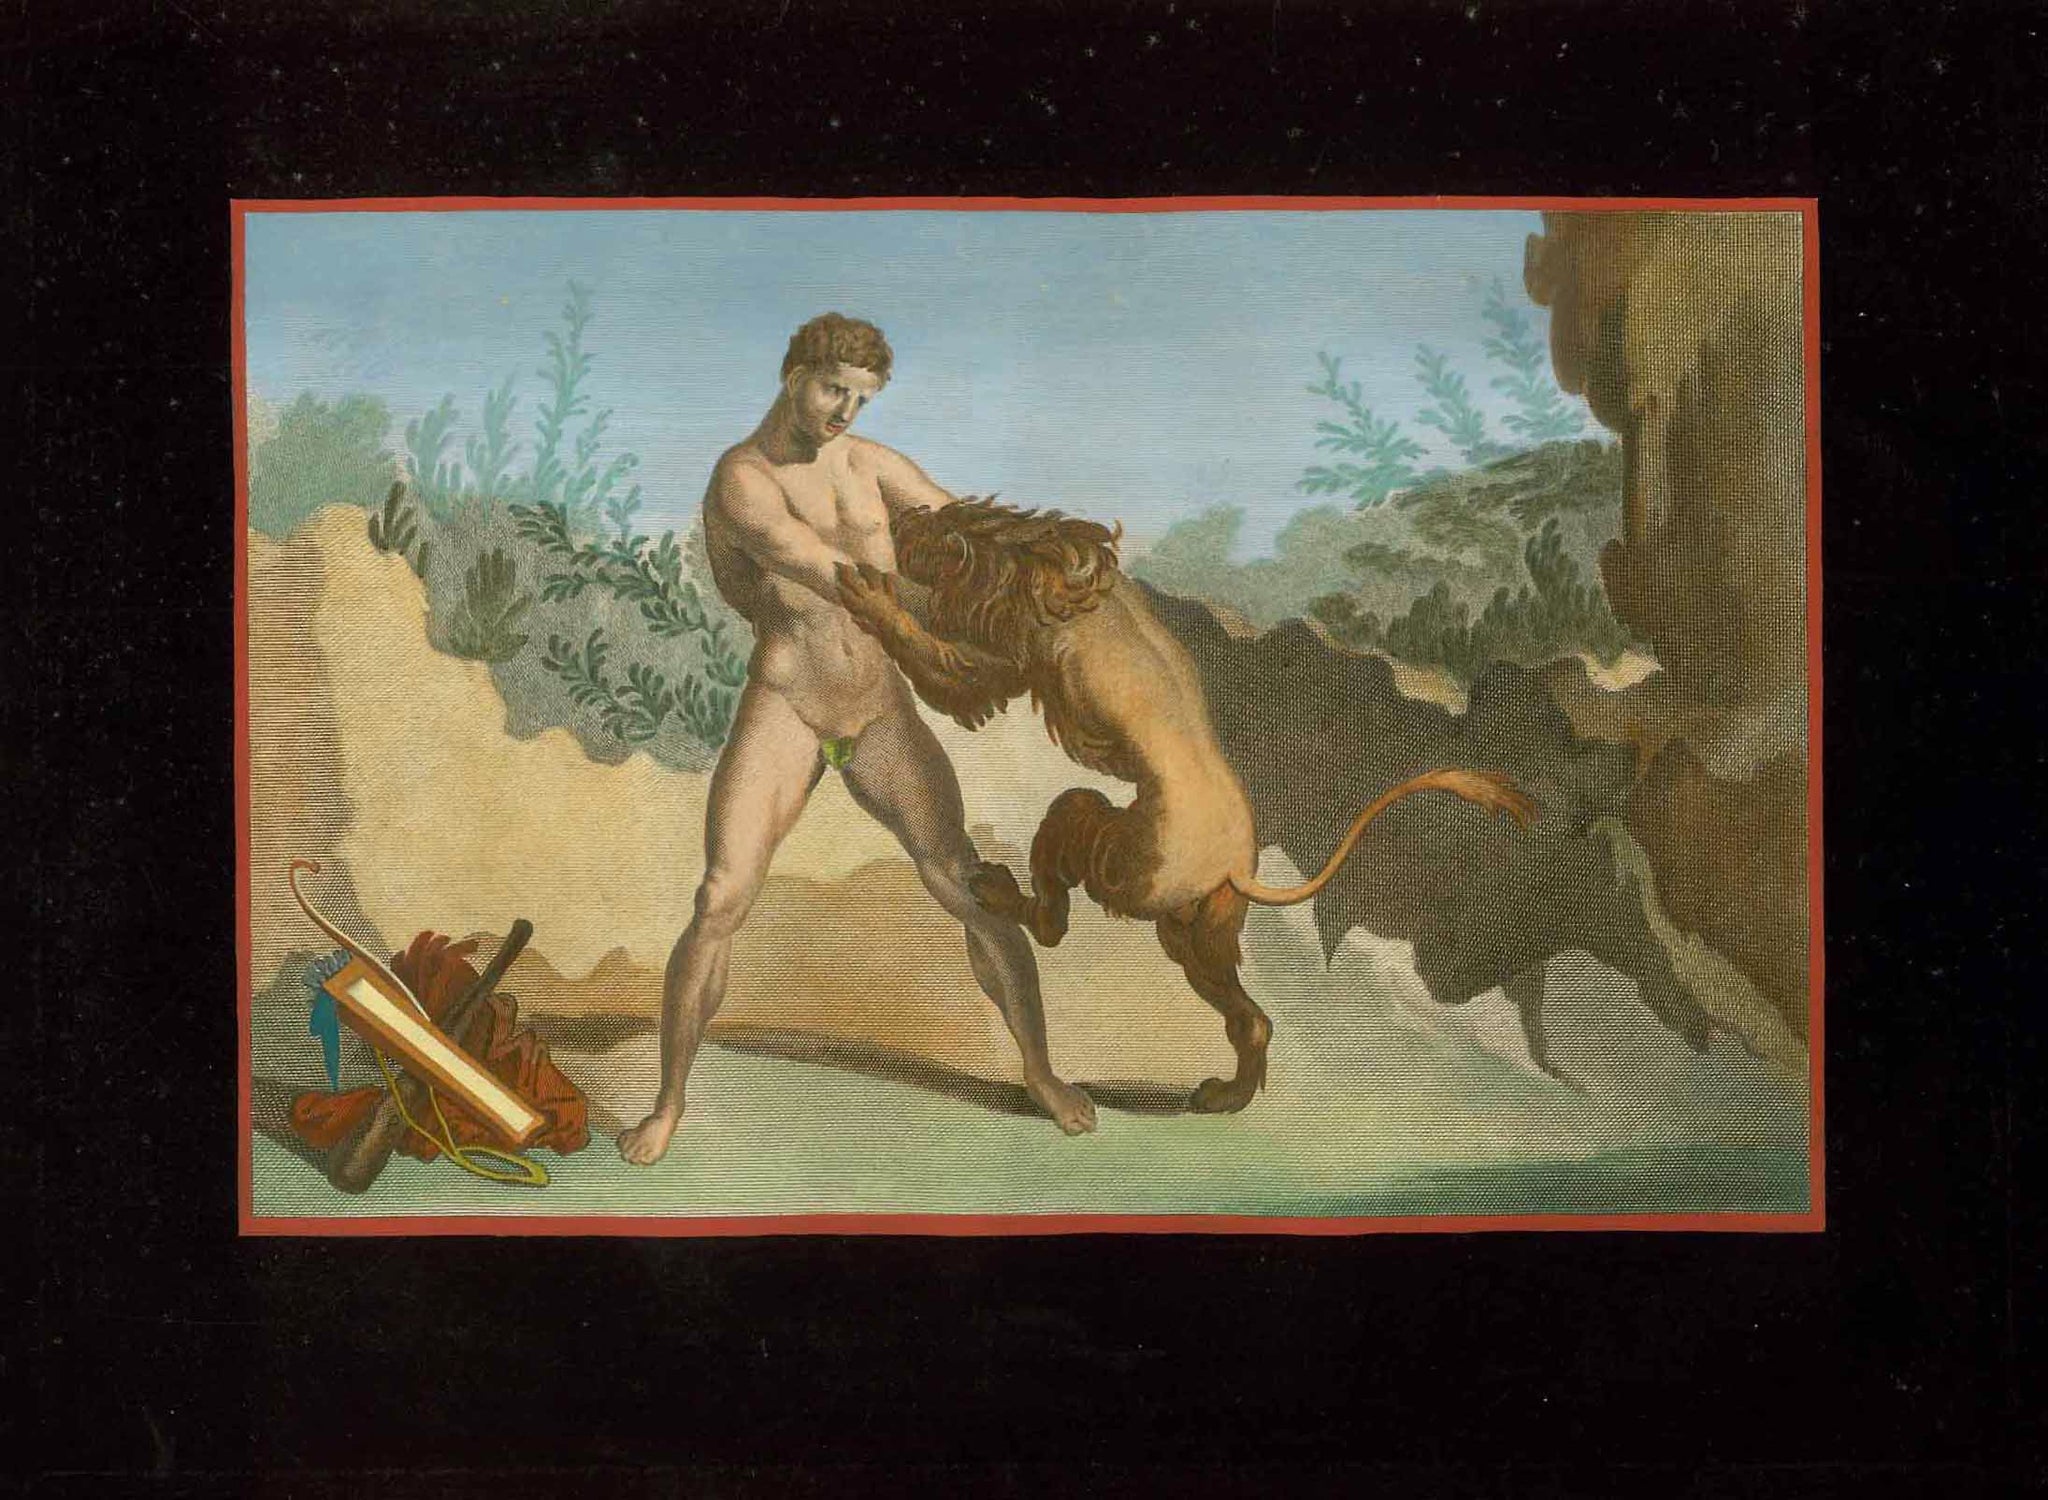 Hercules inmids of his first (of twelve) tasks: Defeat the Nemean Lion.  The Nimean Lion was not just "a lion". It was, in Greek Mythology,  a monster lion living in Nemea (a city on the Peloponnese). Mortals were unable to kill it, all weapons failed. But Hercules with his supra natural force killed the beast. And his first task was accomplished!  Wall fresco in Herculaneum  Anonymous hand-colored (gouache) copper etching.  Published in "Le Antichita di Ercolano esposte"